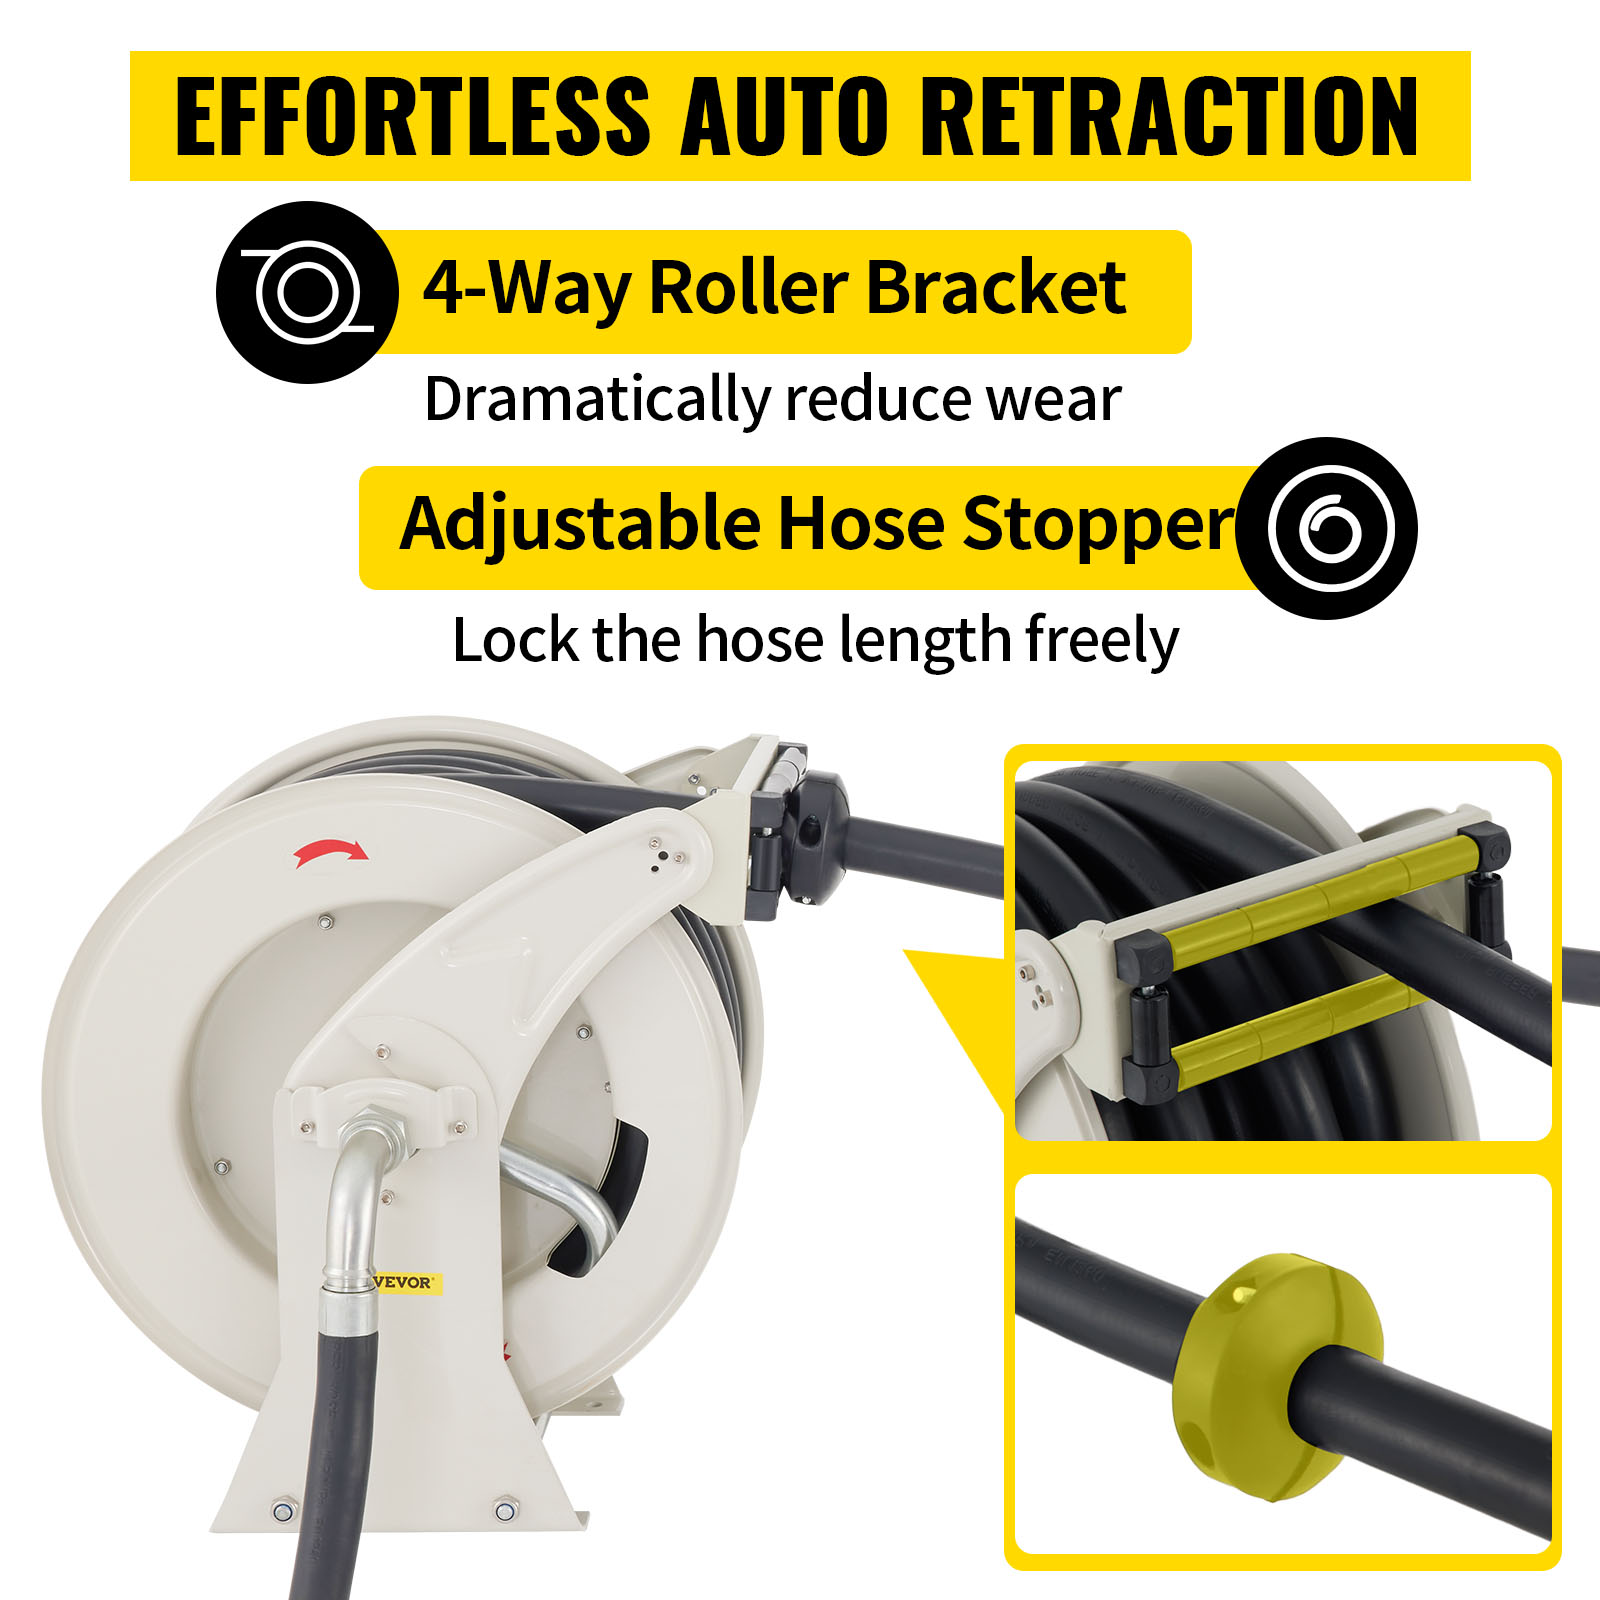 Diesel Fuel Hose Reel Retractable 1 x 50' Spring Driven Auto Swivel Rewind  Industrial Heavy Duty Commercial Hose Holder Reel with Fueling Nozzle for  Aircraft Ship Vehicle Tank Truck, 300 PSI 